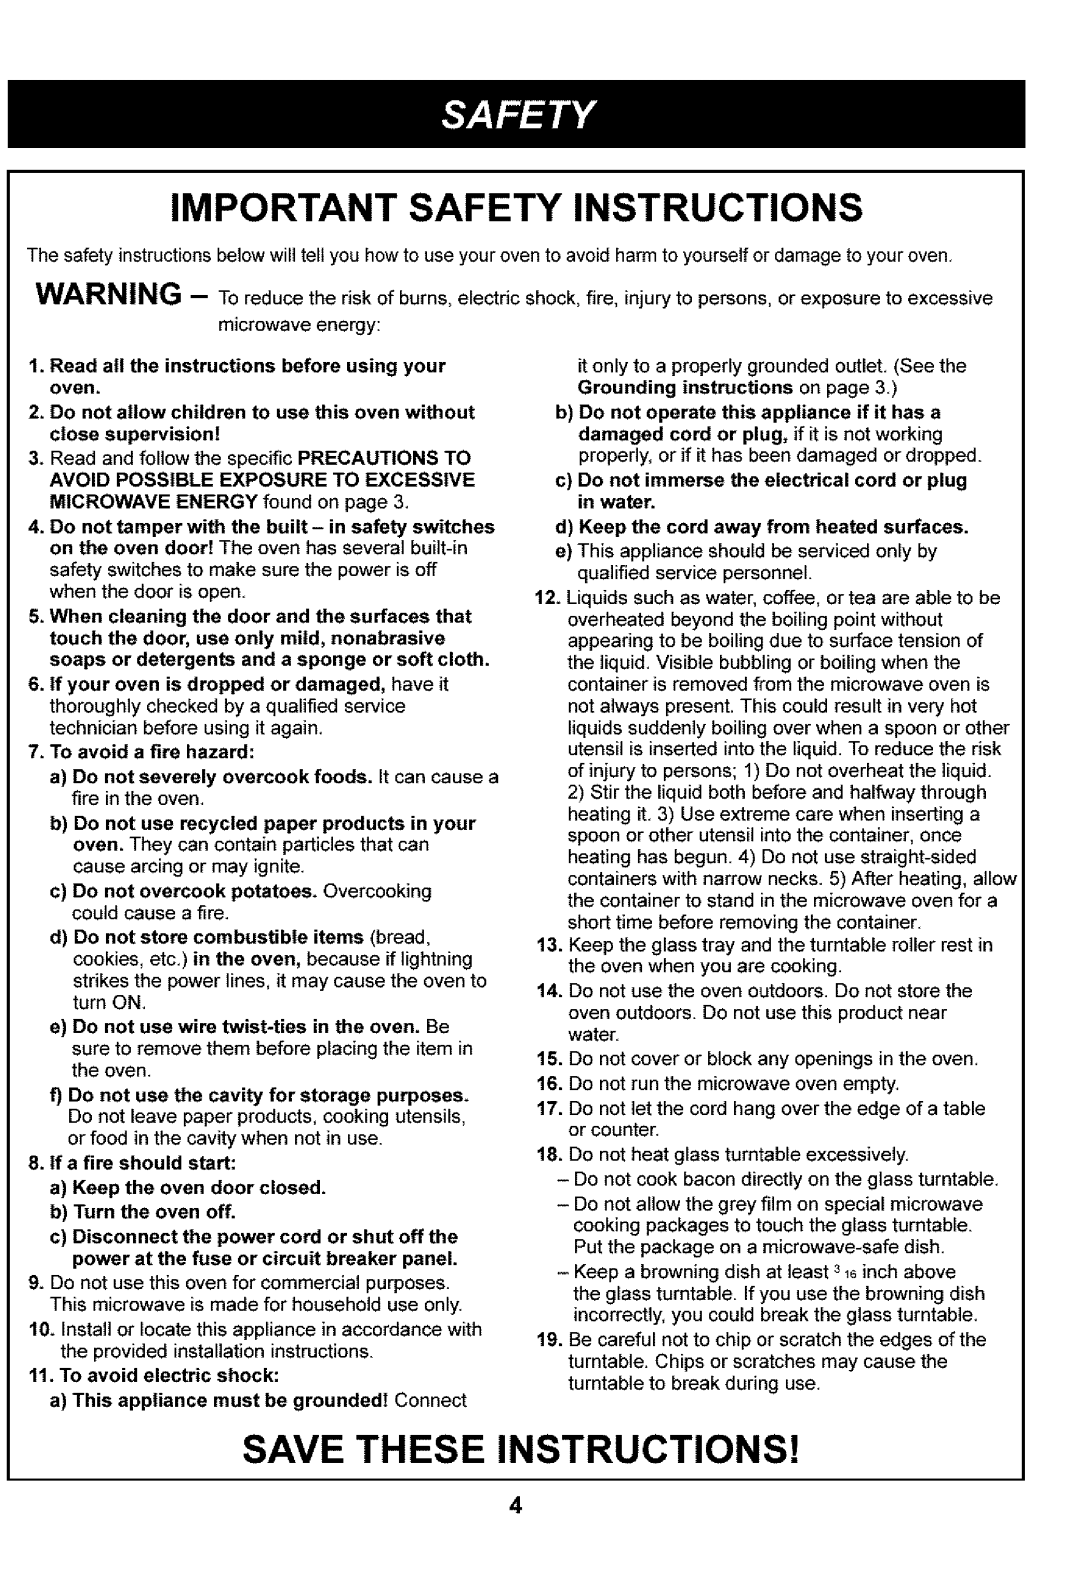 Kenmore 721.63109, 721.63102 manual Important Safety Instructions, Save These Instructions 